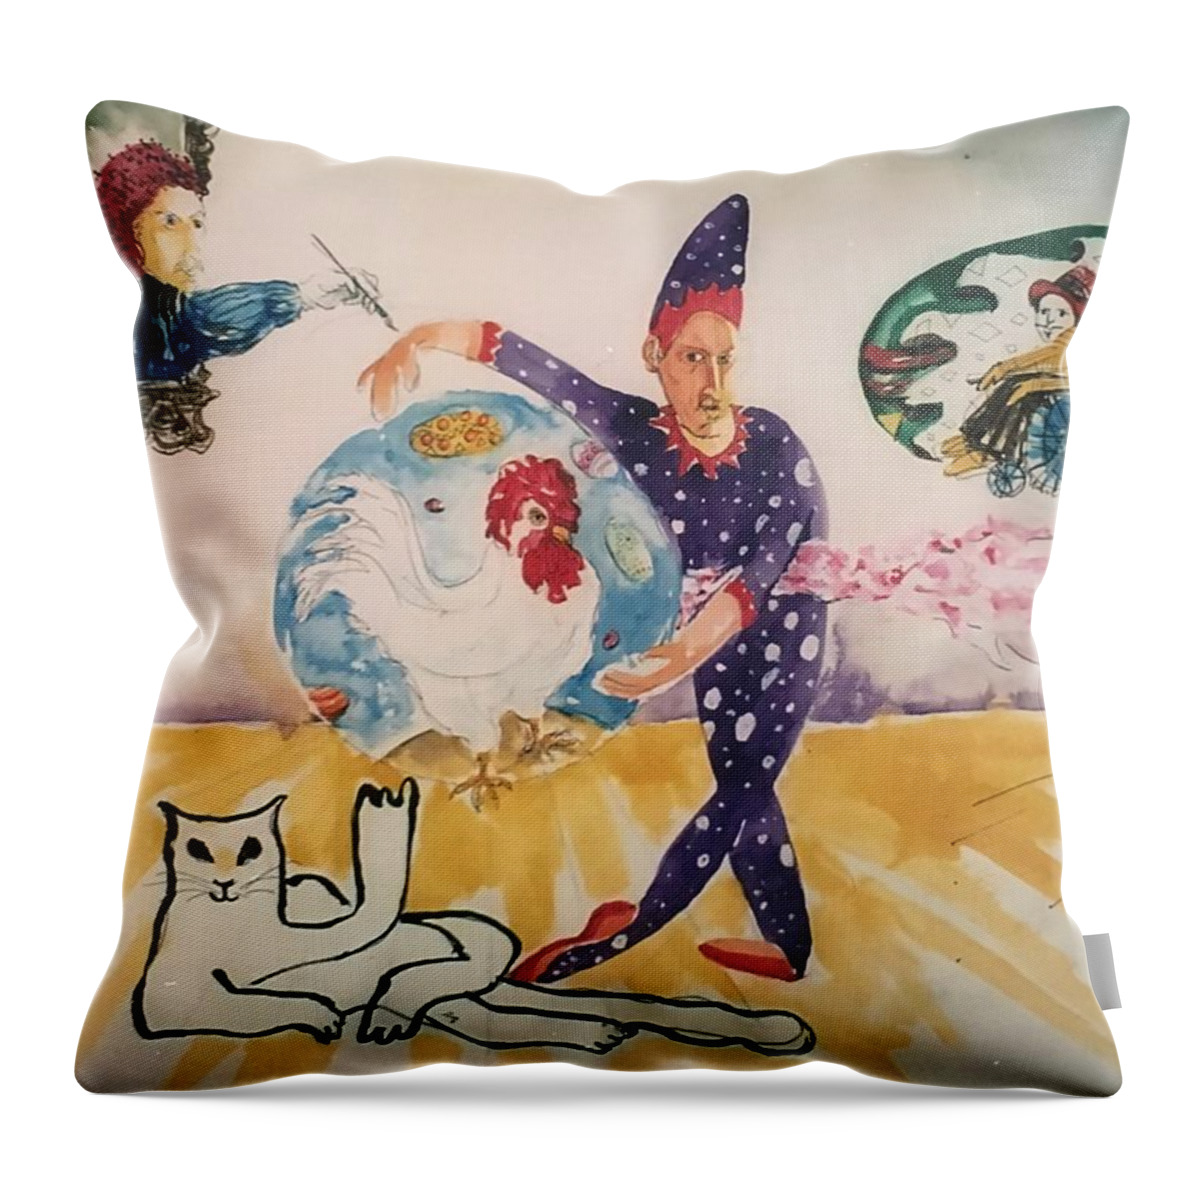 Ricardosart37 Throw Pillow featuring the painting Spring Wizardry by Ricardo Penalver deceased